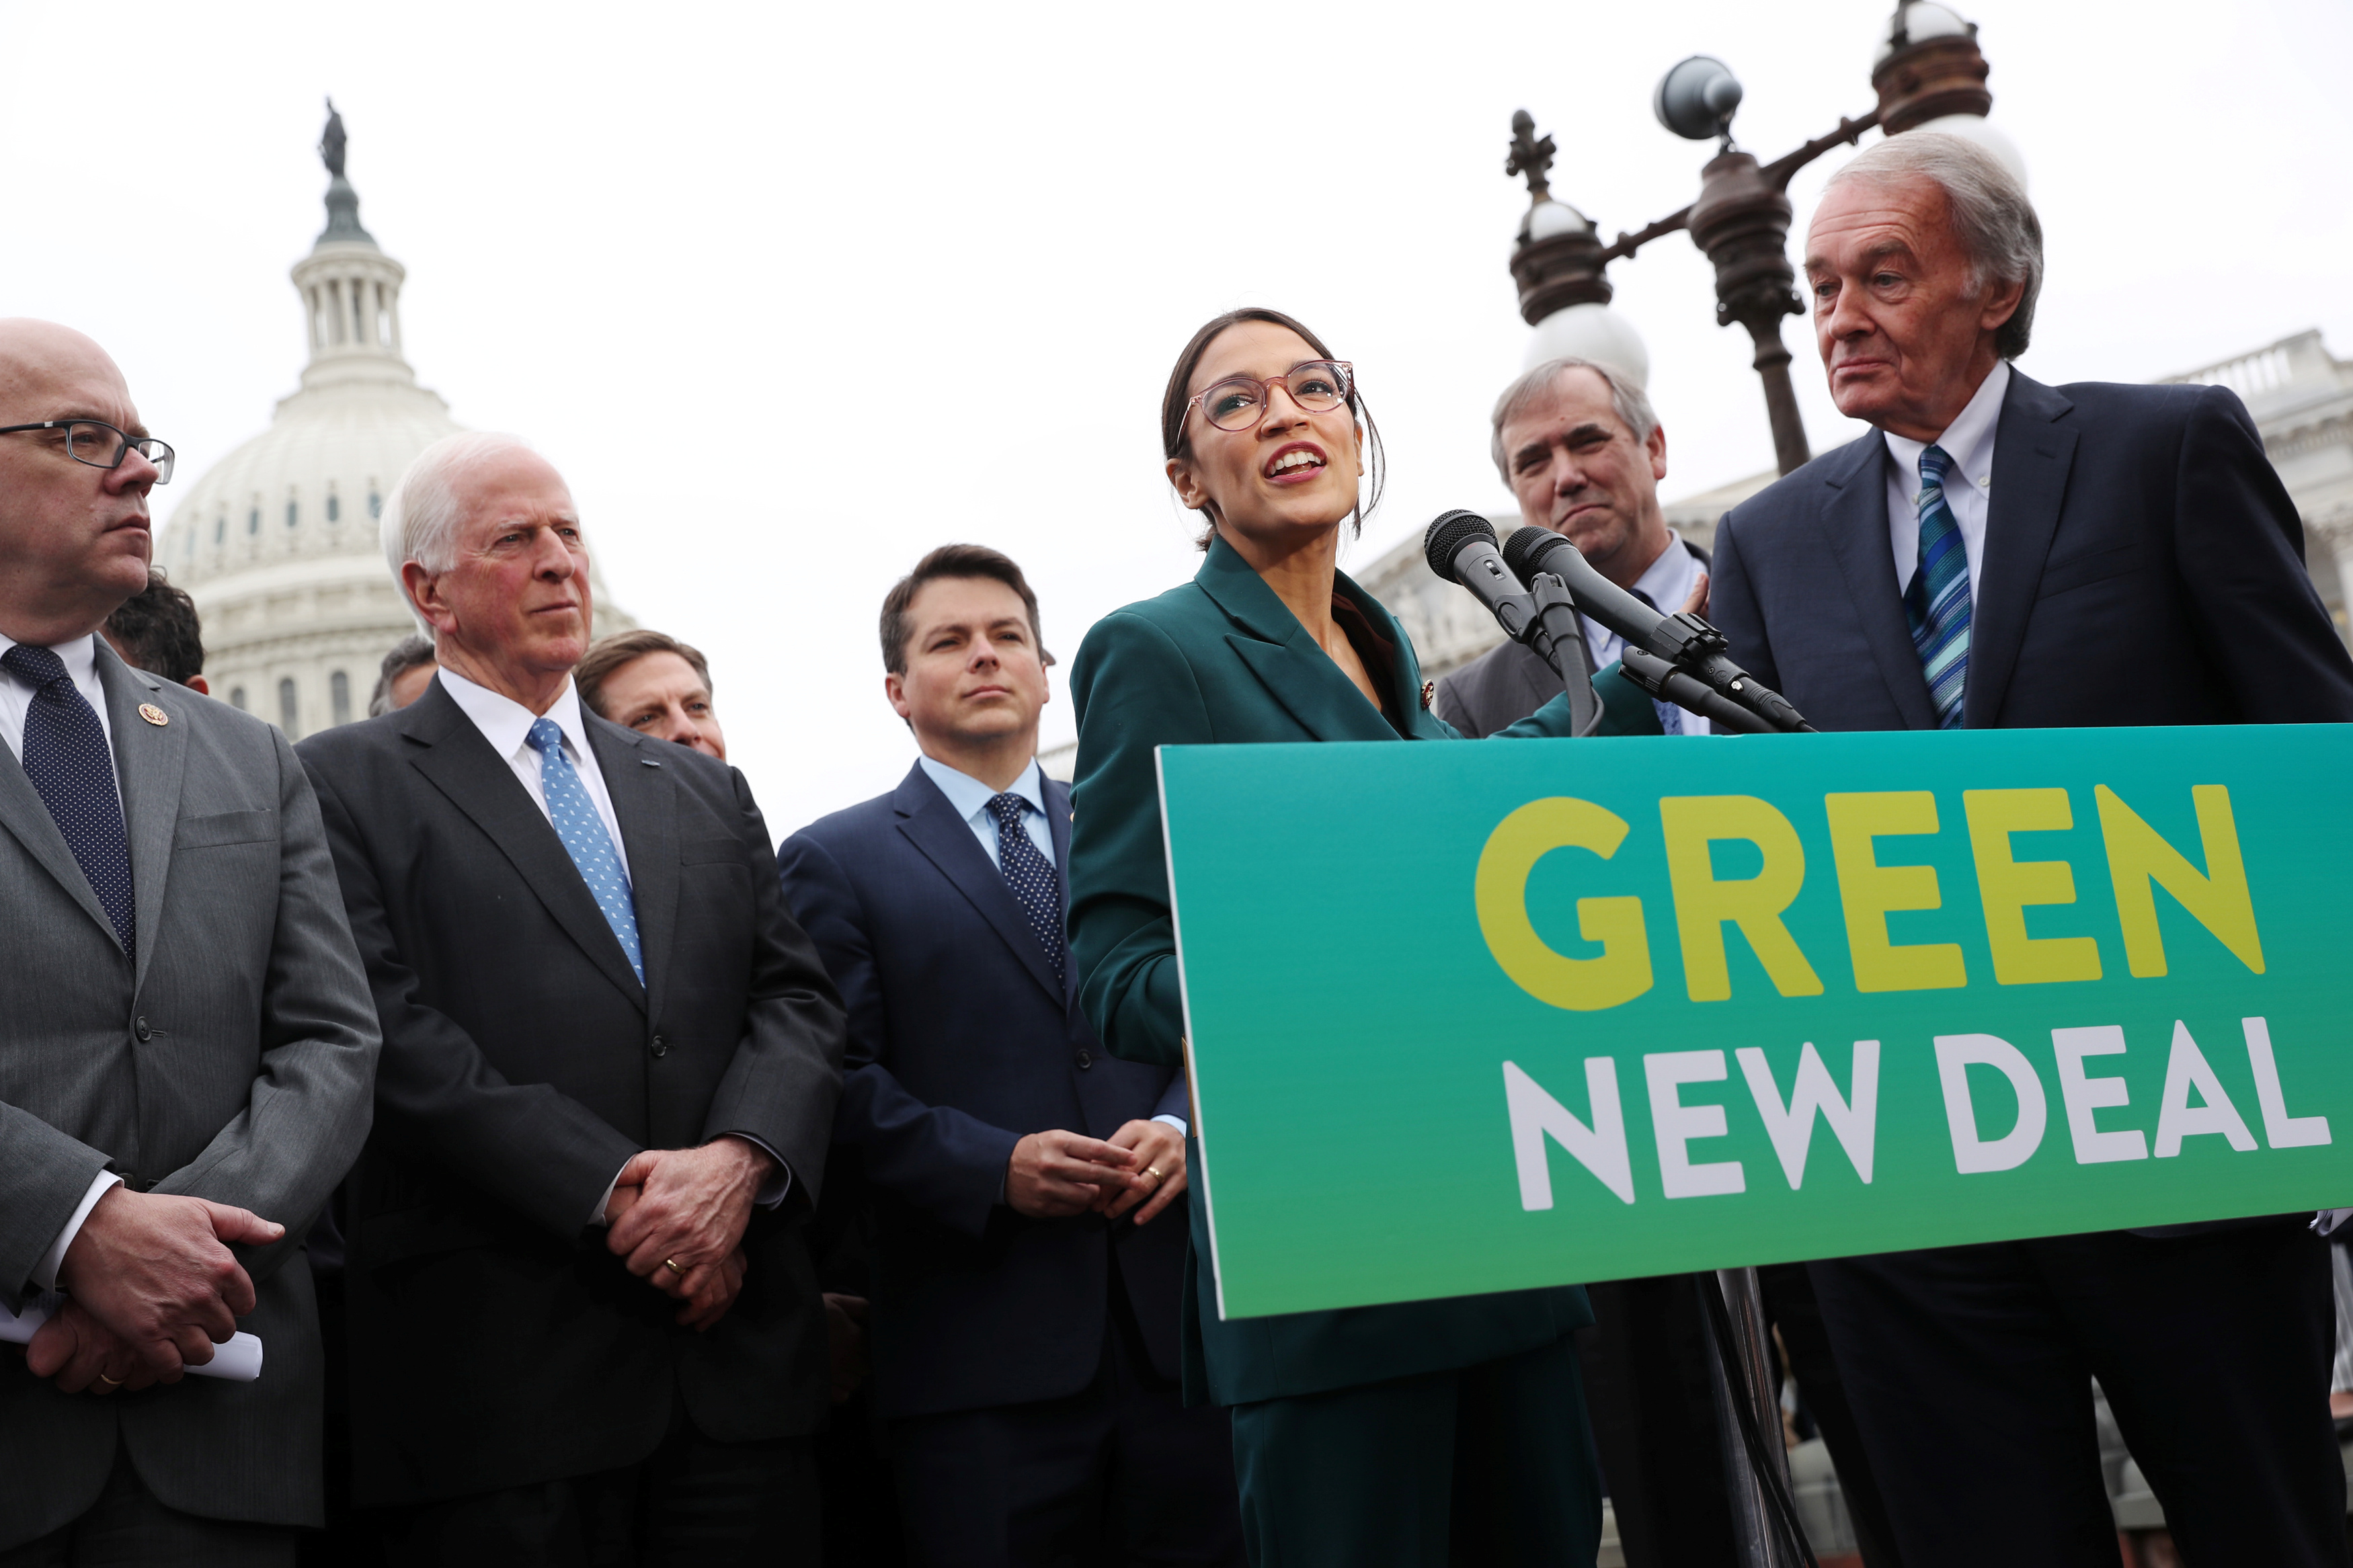 U.S. Representative Ocasio-Cortez and Senator Markey hold a news conference for their proposed "Green New Deal" at the U.S. Capitol in Washington